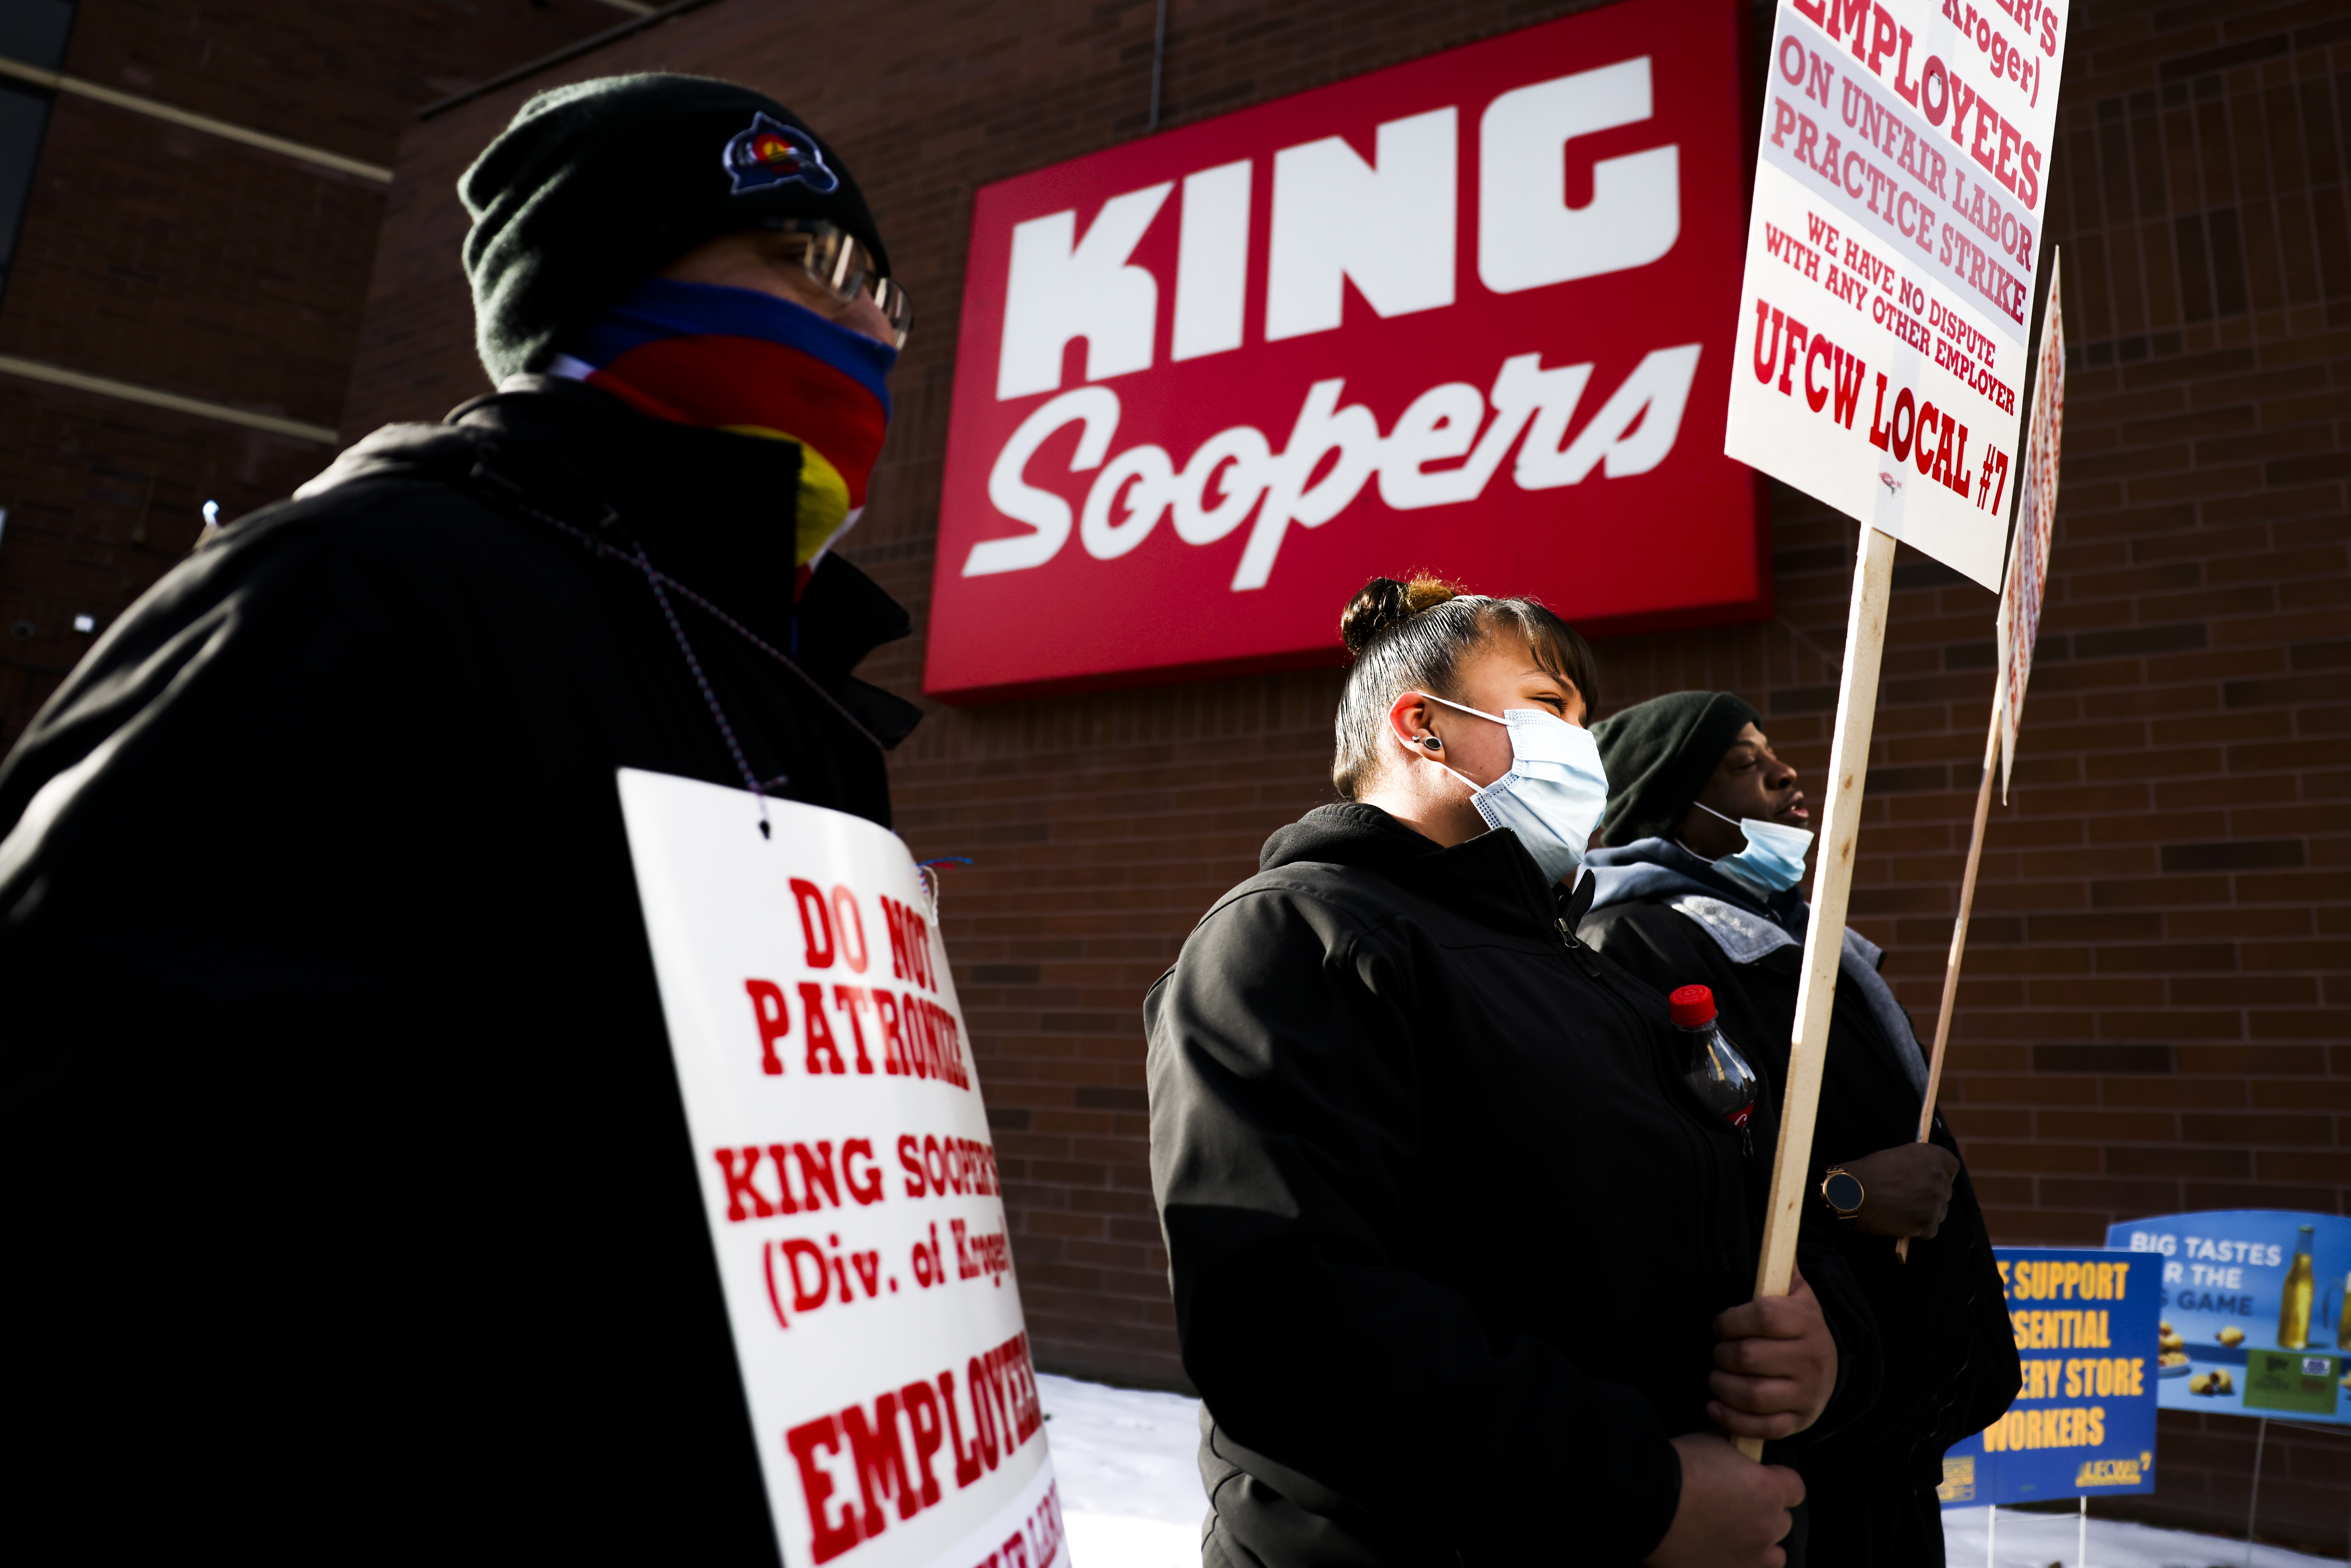 King Soopers has reached an agreement with Union to end the strike – CBS Denver